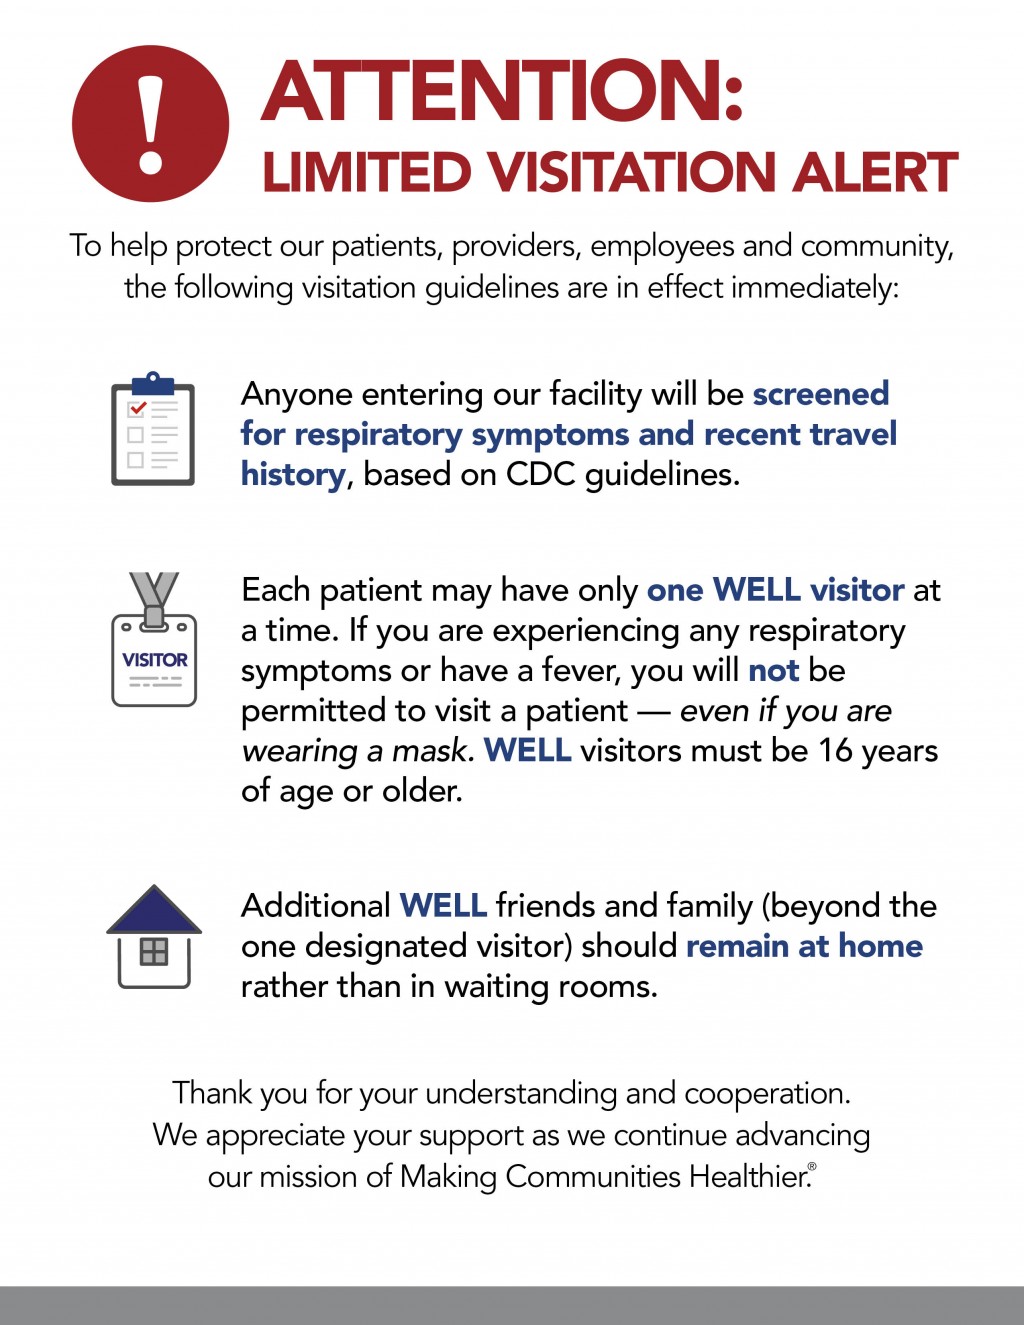 Infographic of Limited Visitation